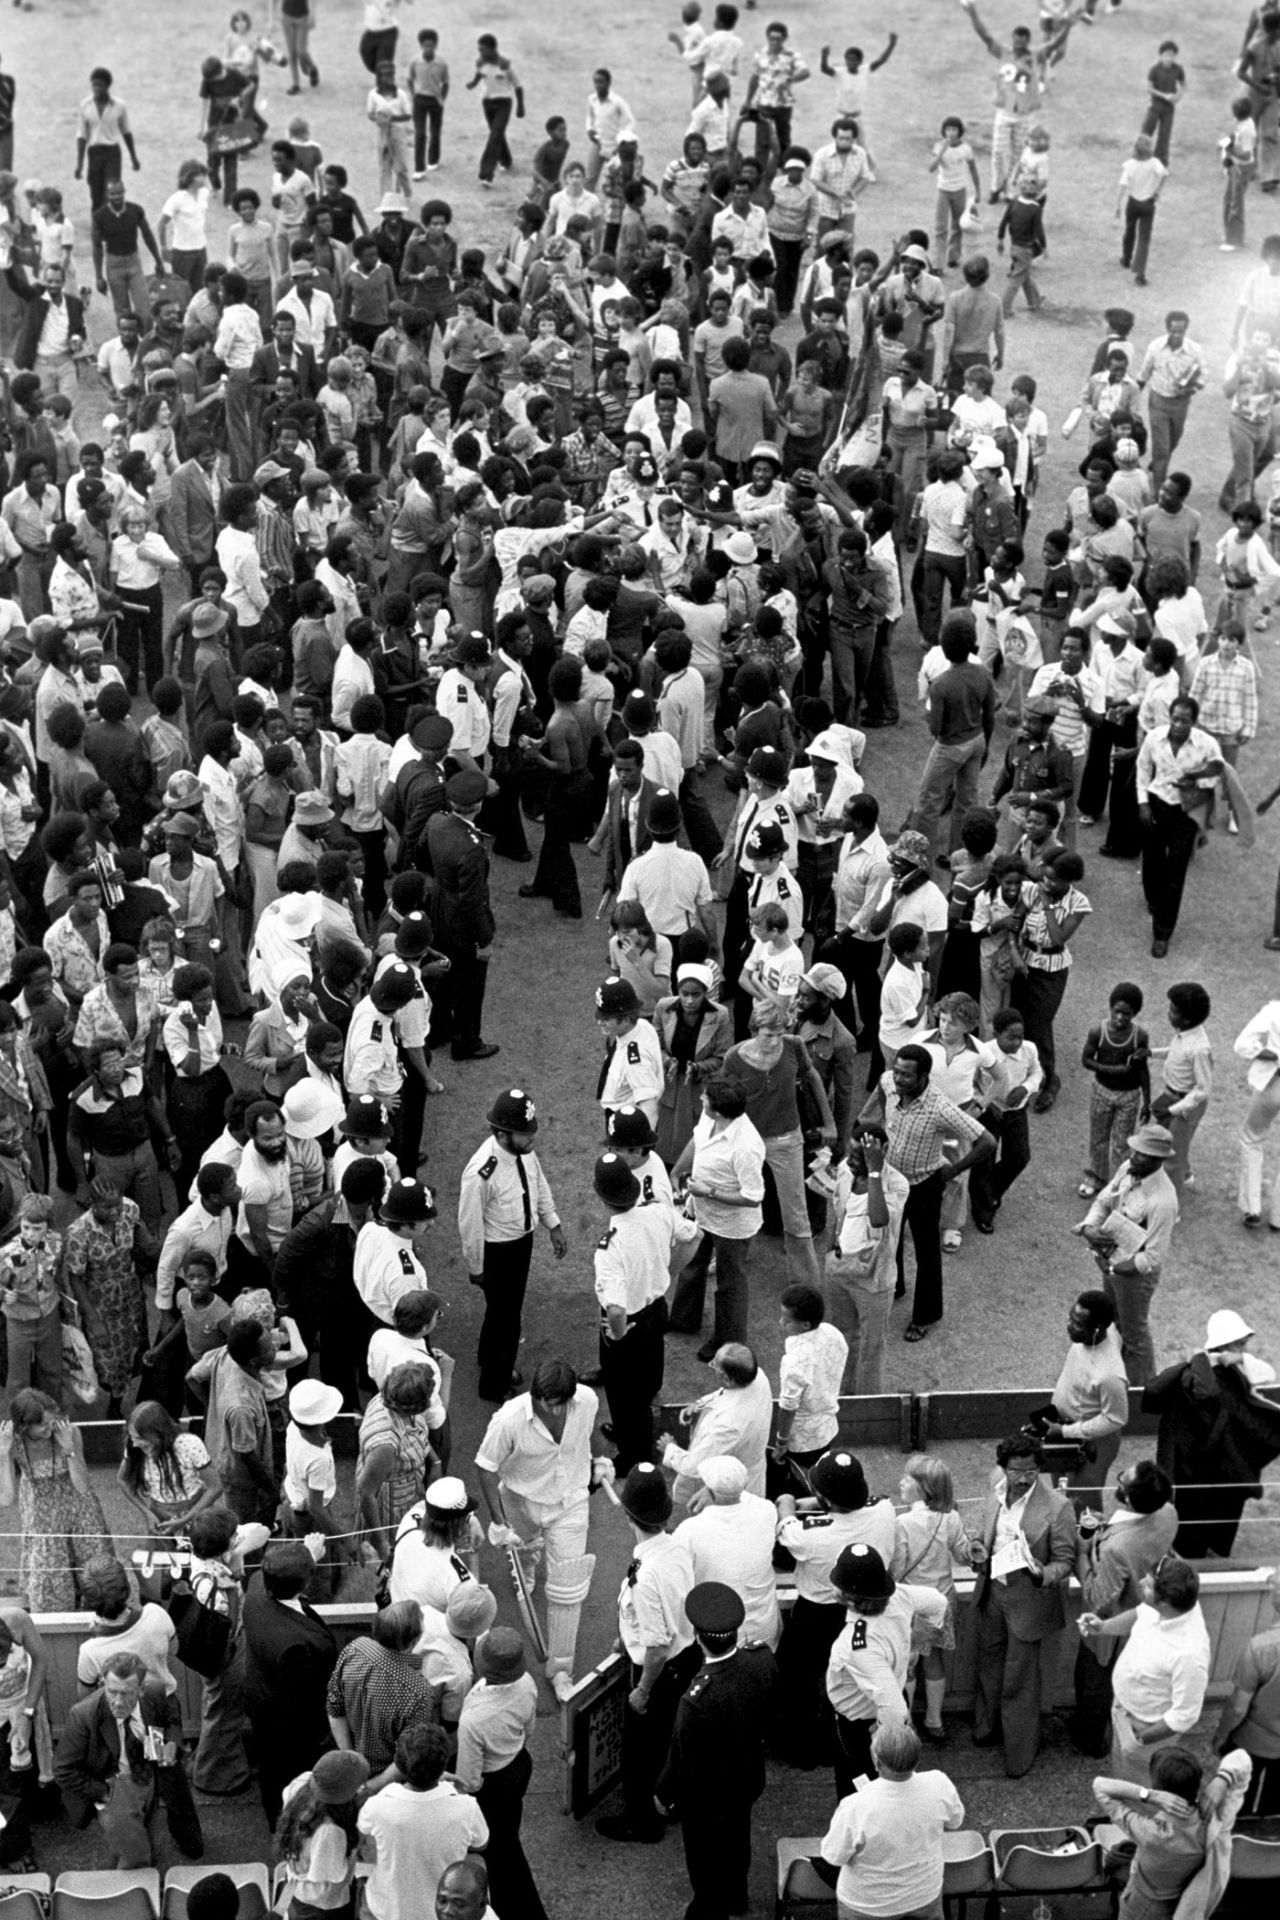 Batsman Mike Selvey and Dickie Bird walk back through the crowd, England v West Indies, 5th Test, The Oval, 5th day, August 17, 1976